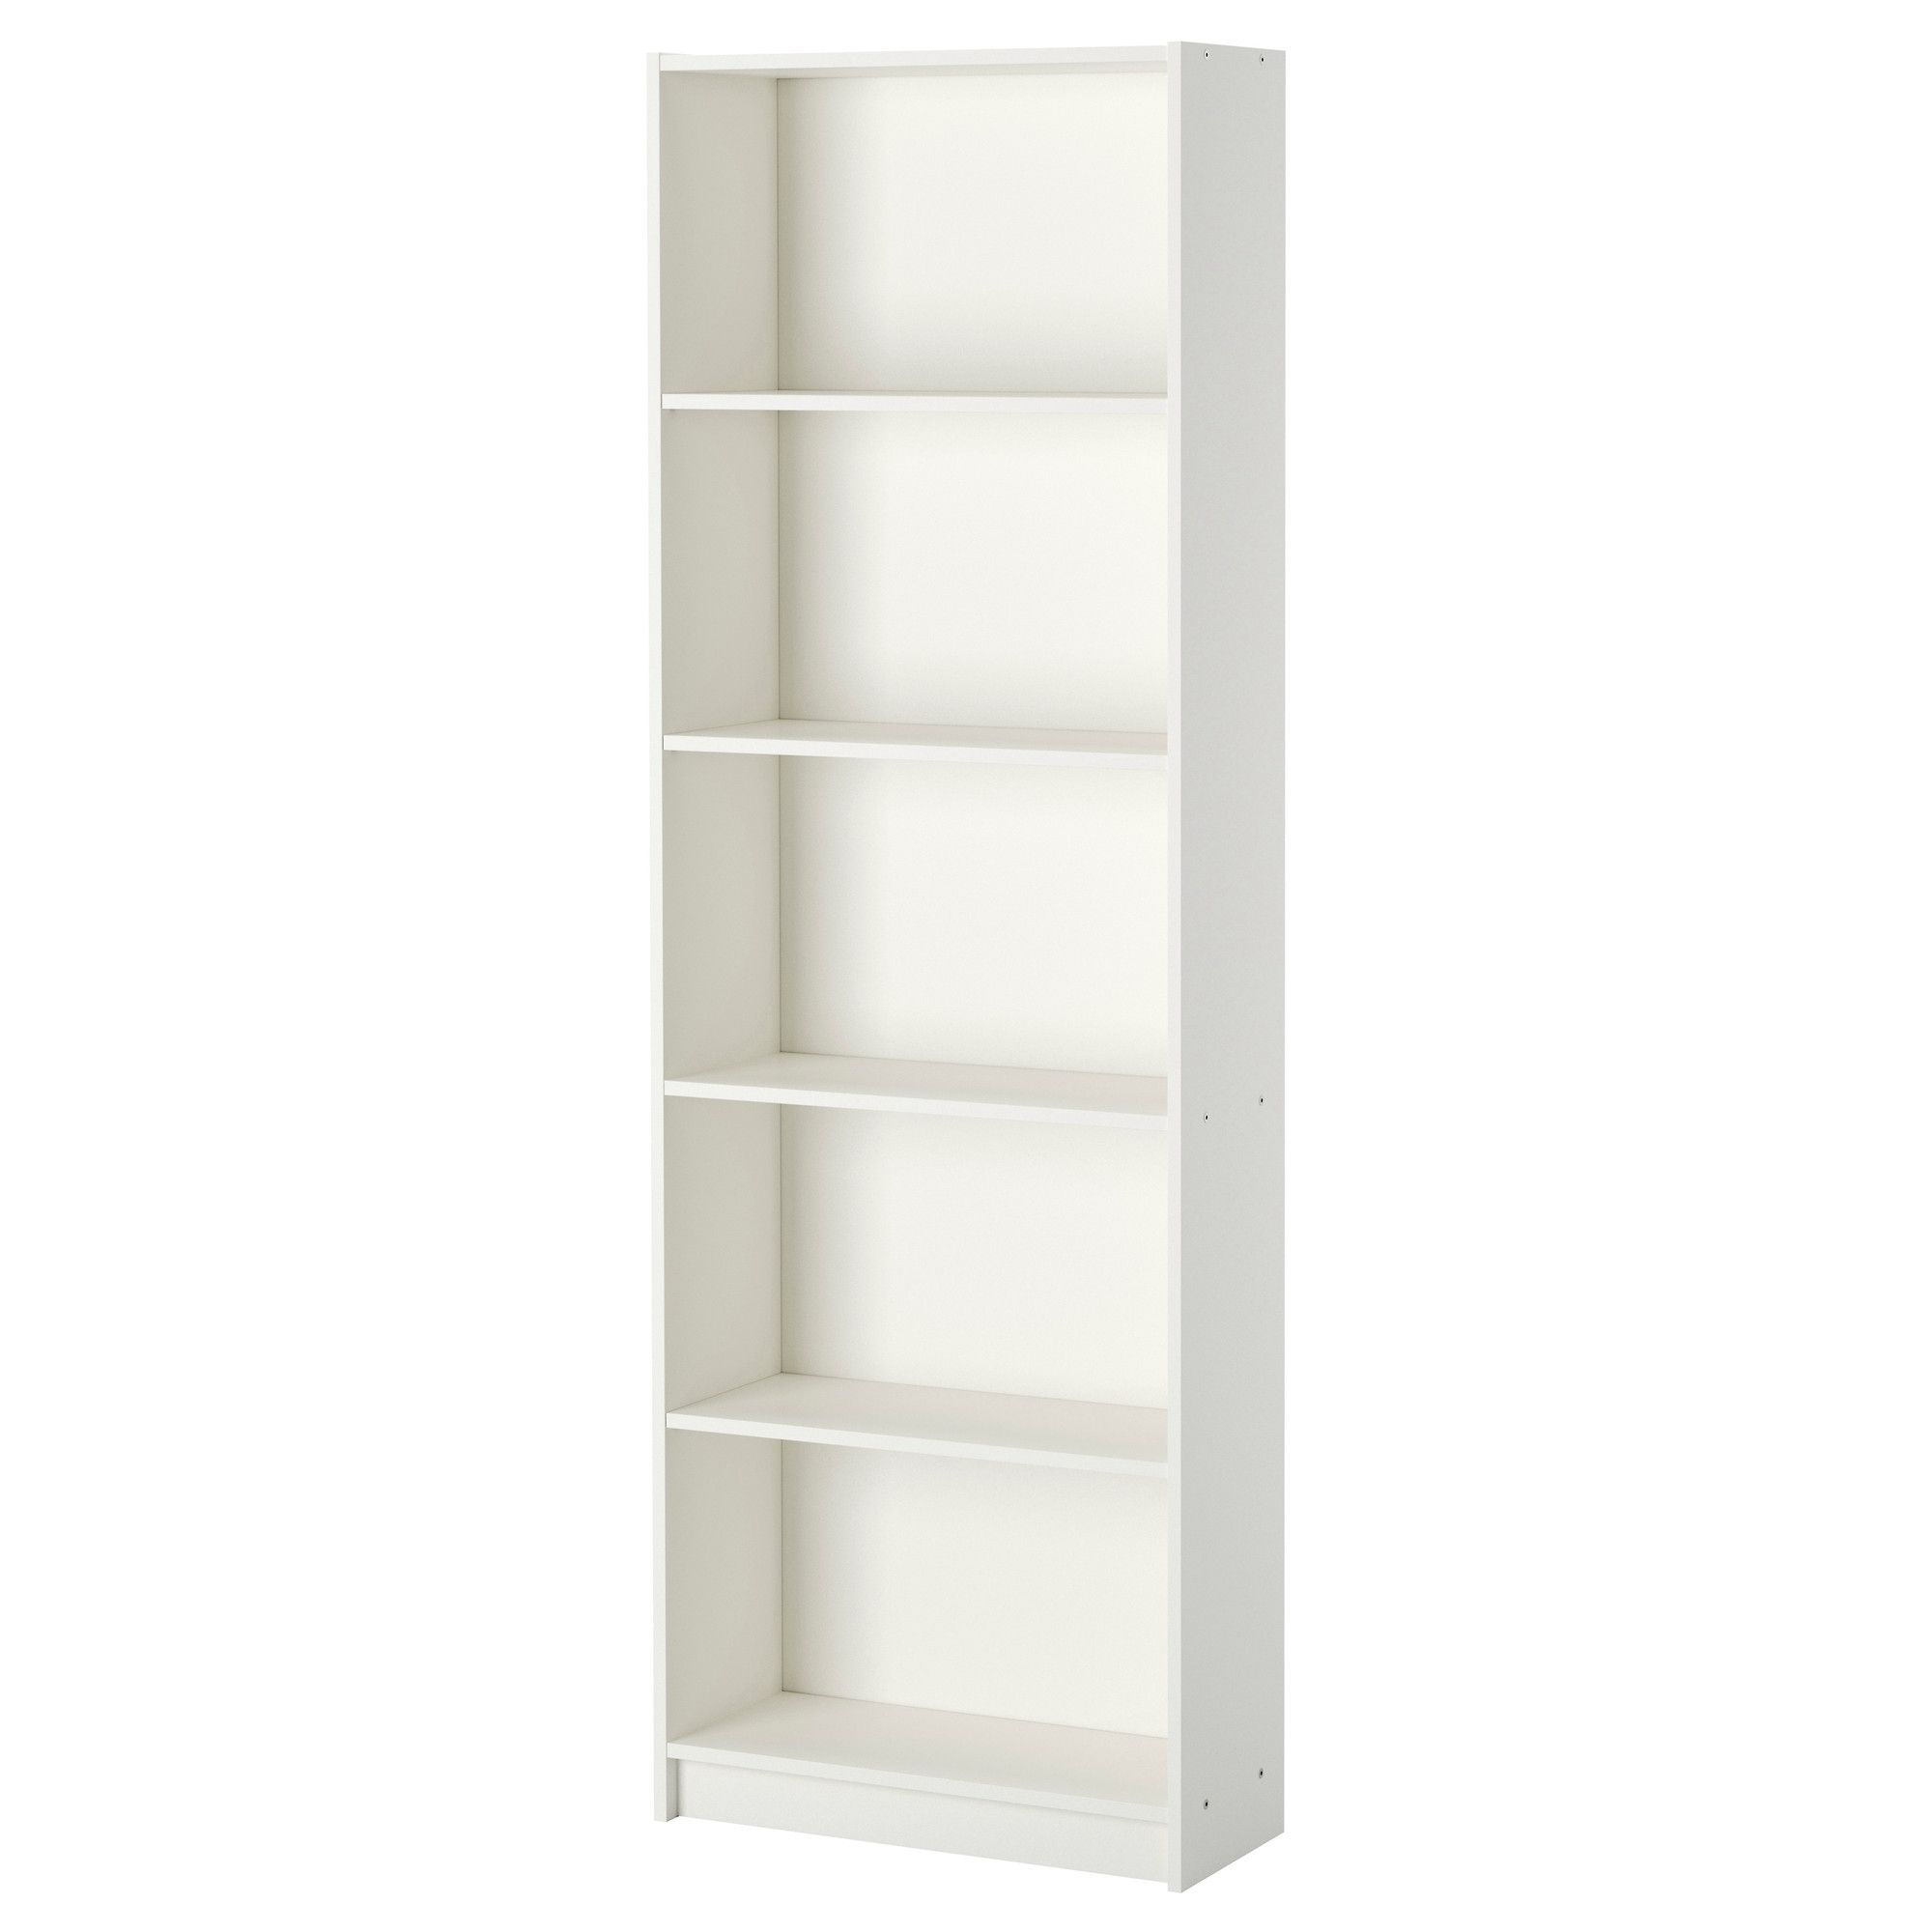 Awesome 8 Inch Bookcase 27 For Your Beech Bookcases With 8 Inch Intended For Beech Bookcases (Photo 13 of 15)